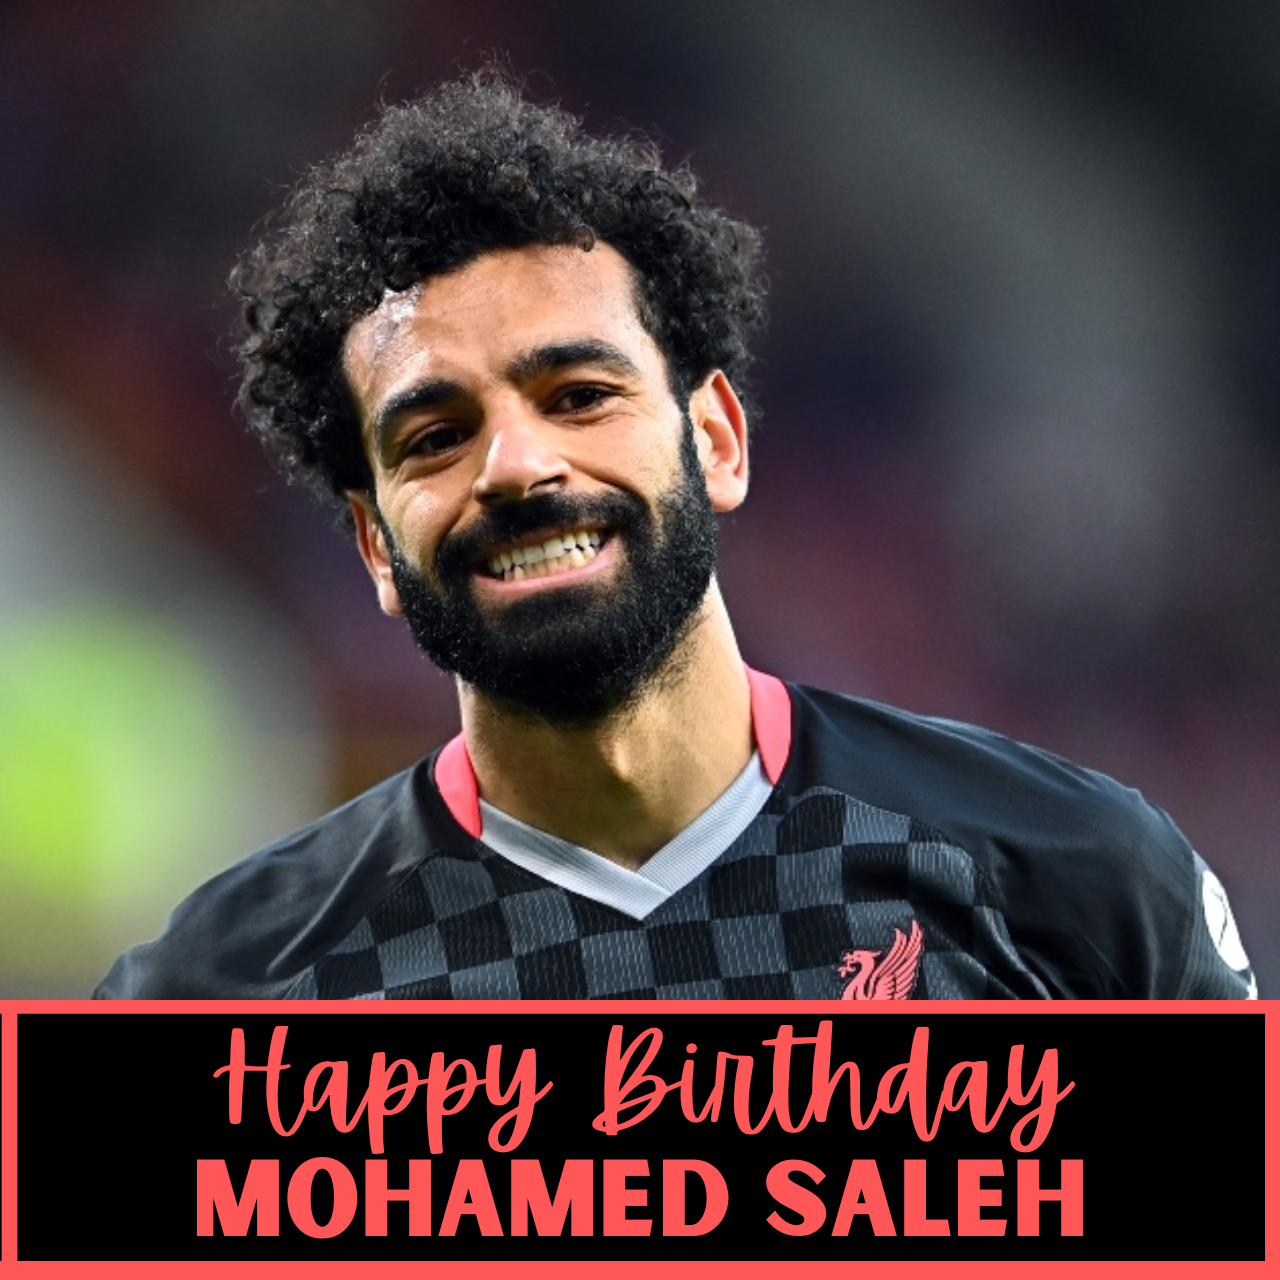 Happy Birthday Mohamed Saleh: Wishes, Quotes, Images, Messages, and Greetings to greet Soccer Superstar